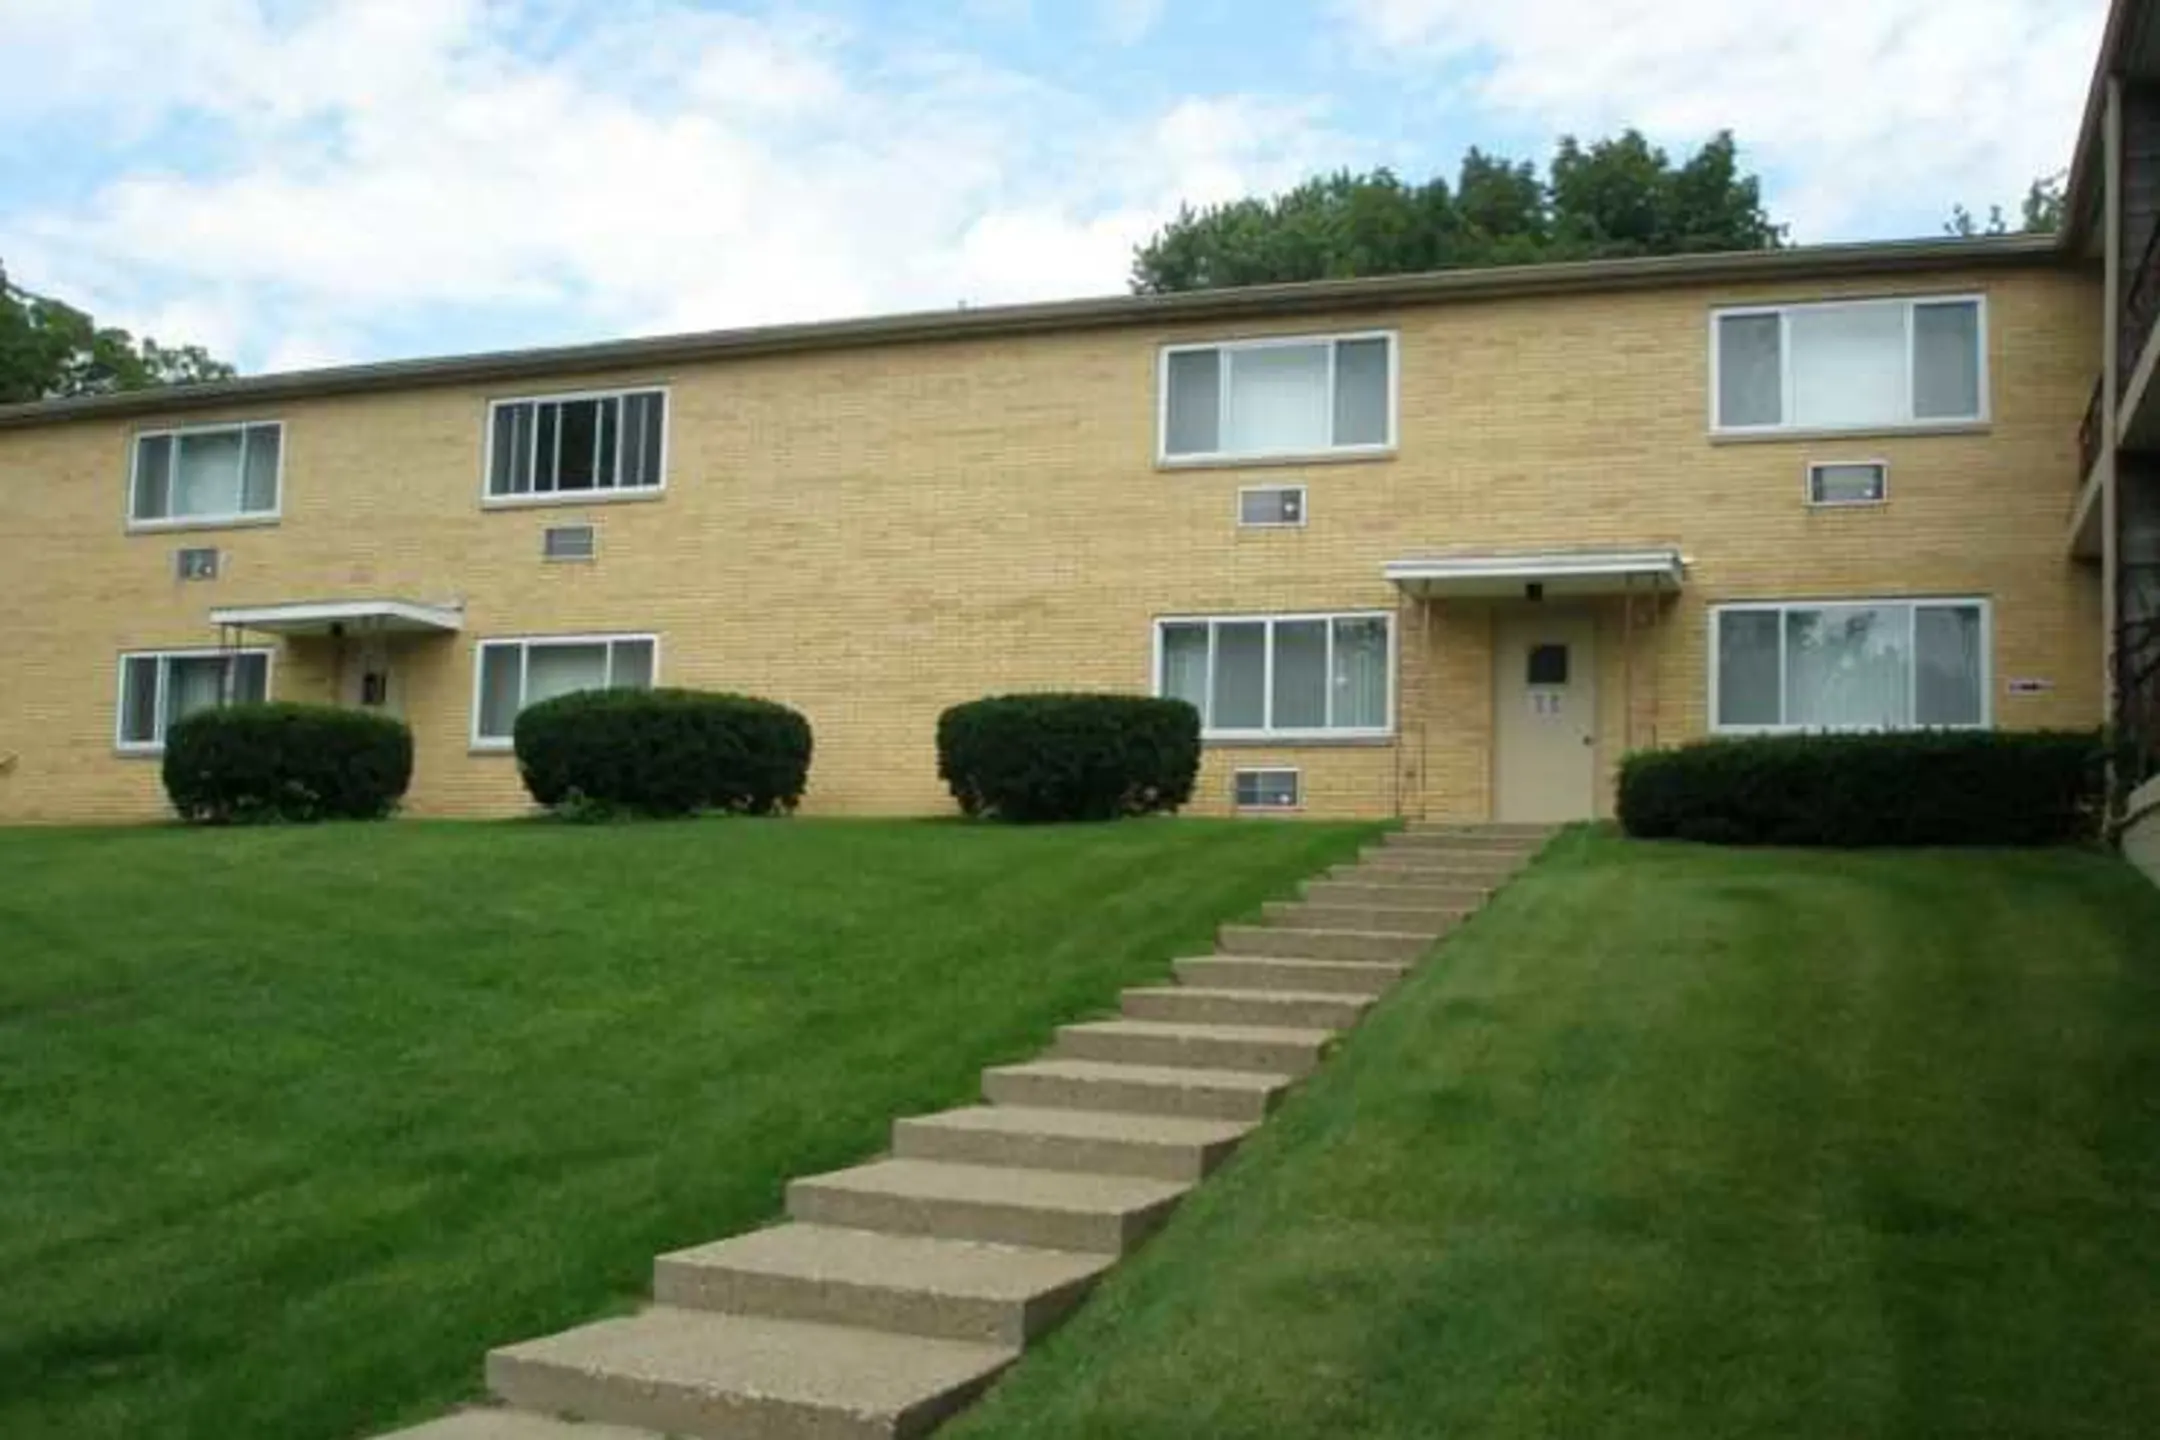 Building - Hillcrest Apartments - South Bend, IN